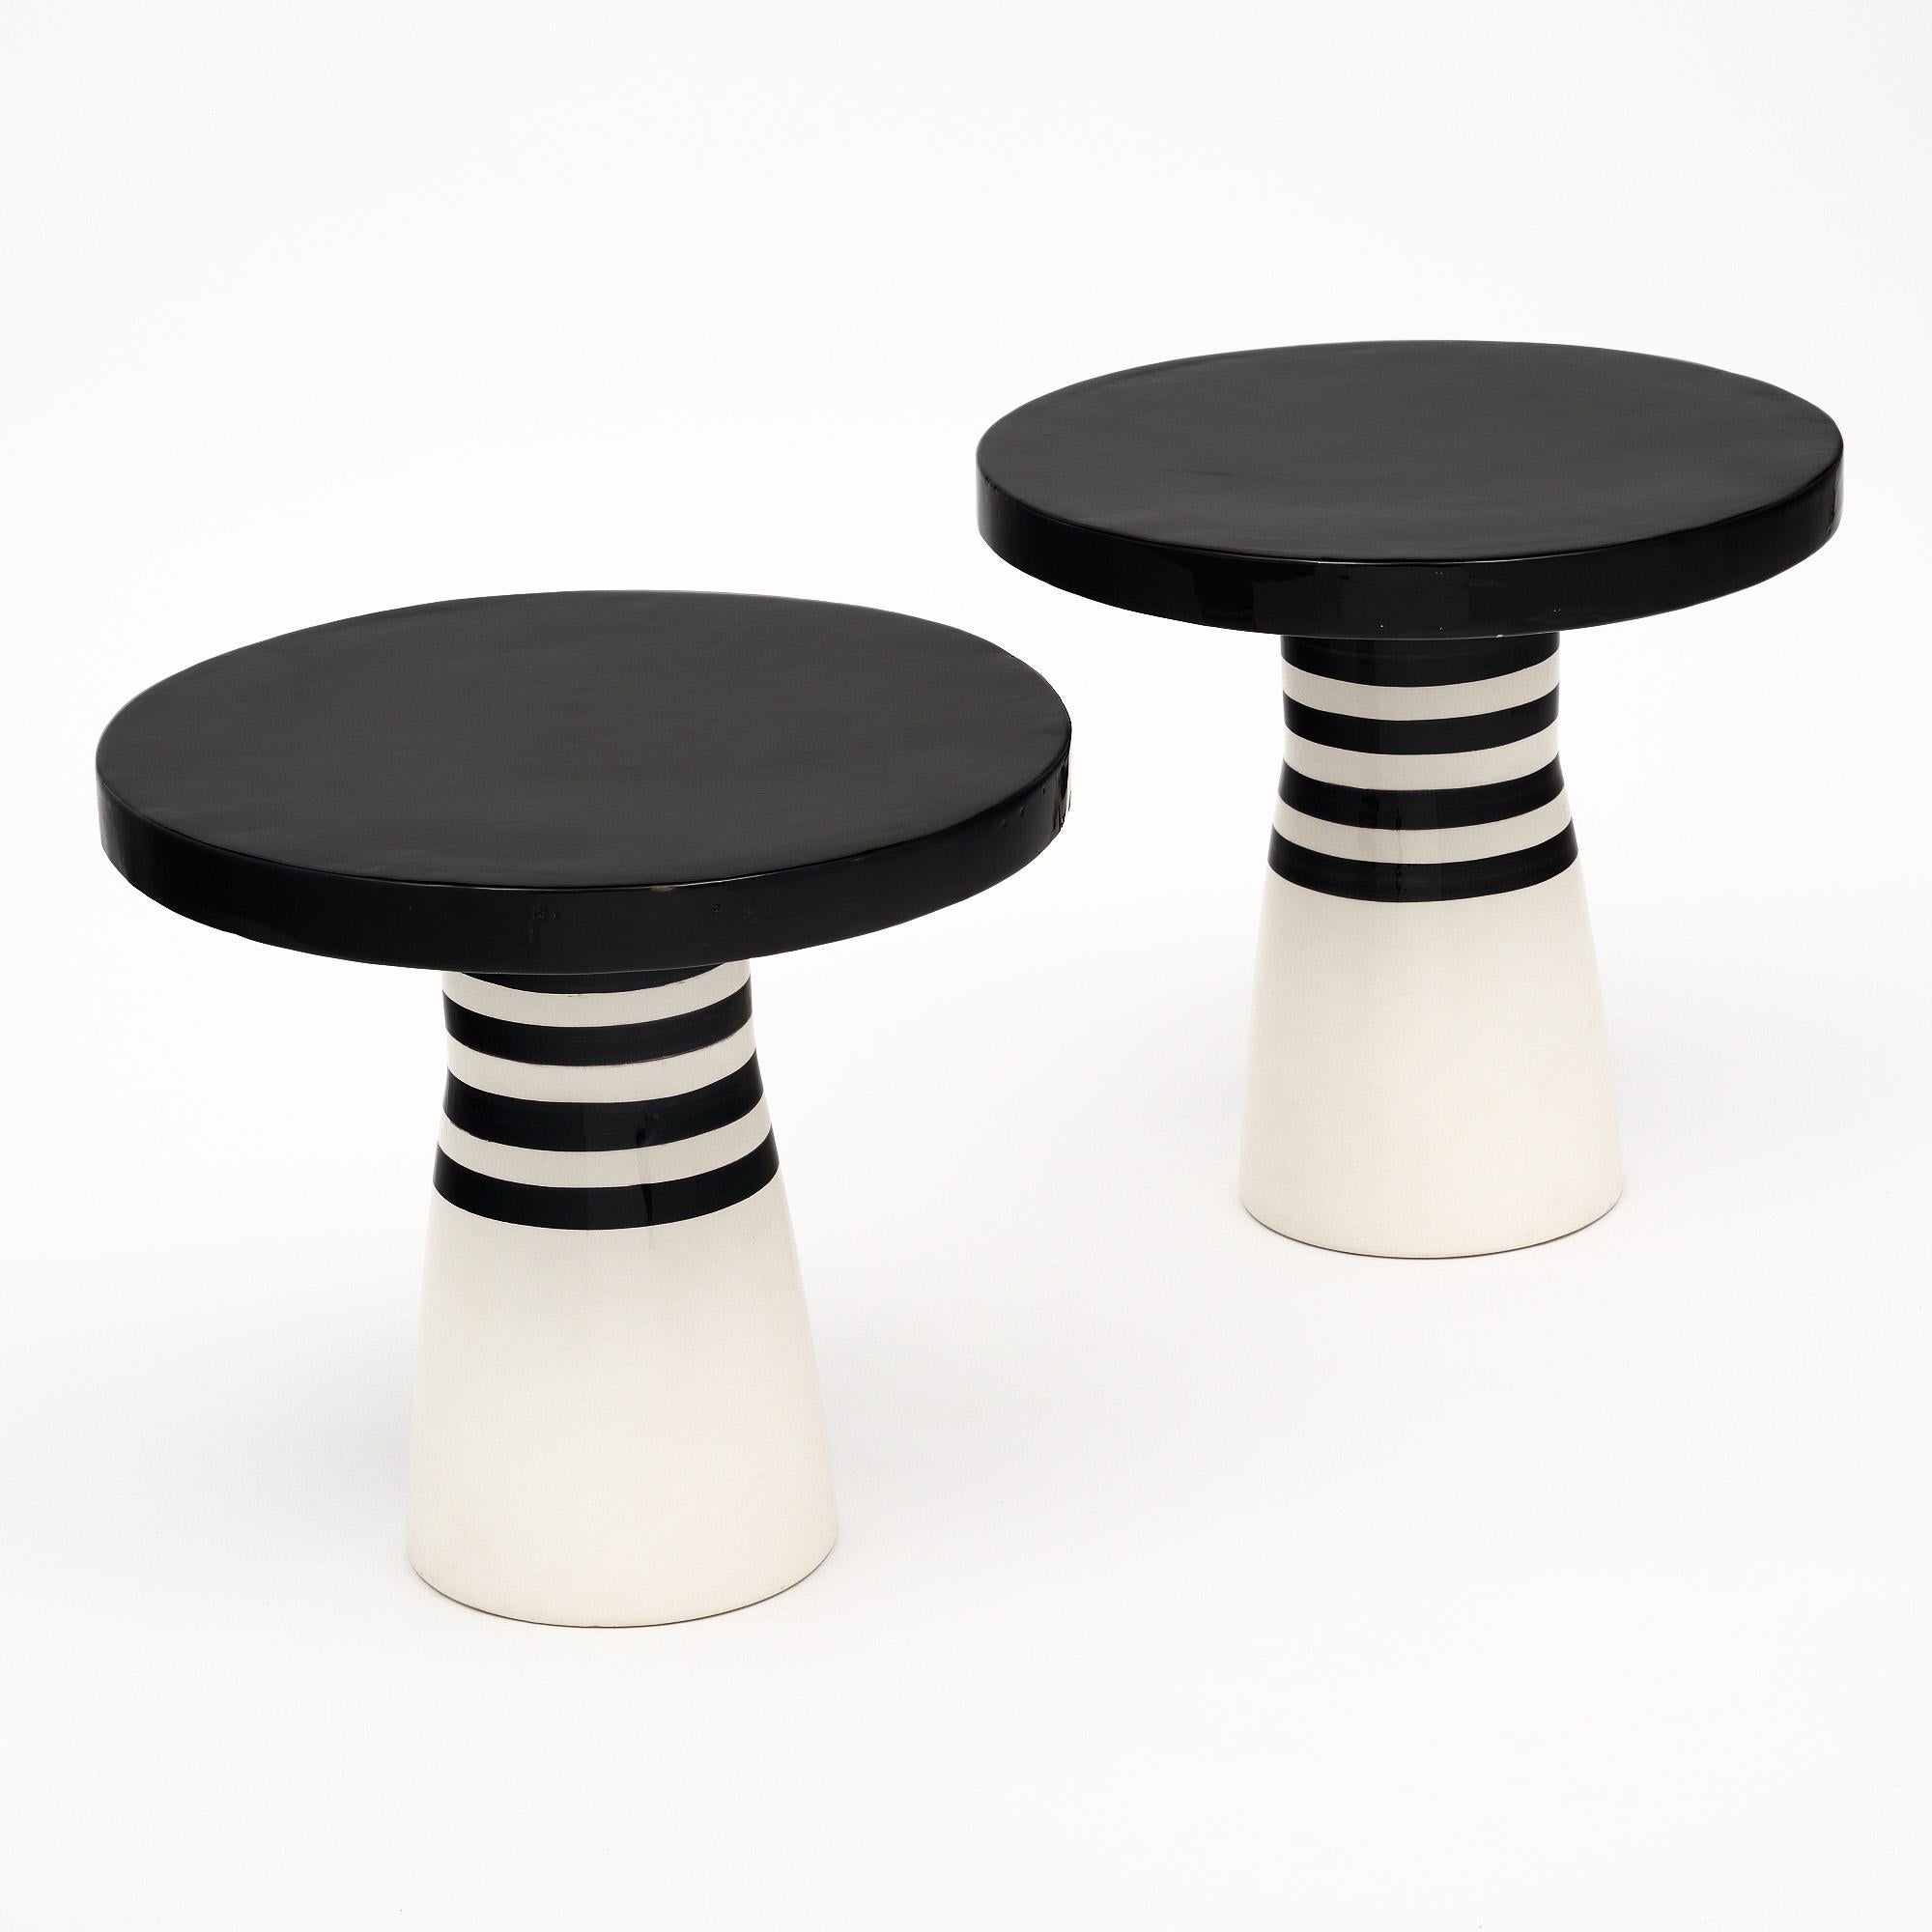 Pair of side tables from France with a unique black and white design. We love the geometric effect of the color blocked lines and the eye catching simplicity of the form. The tables are made entirely of ceramic.
